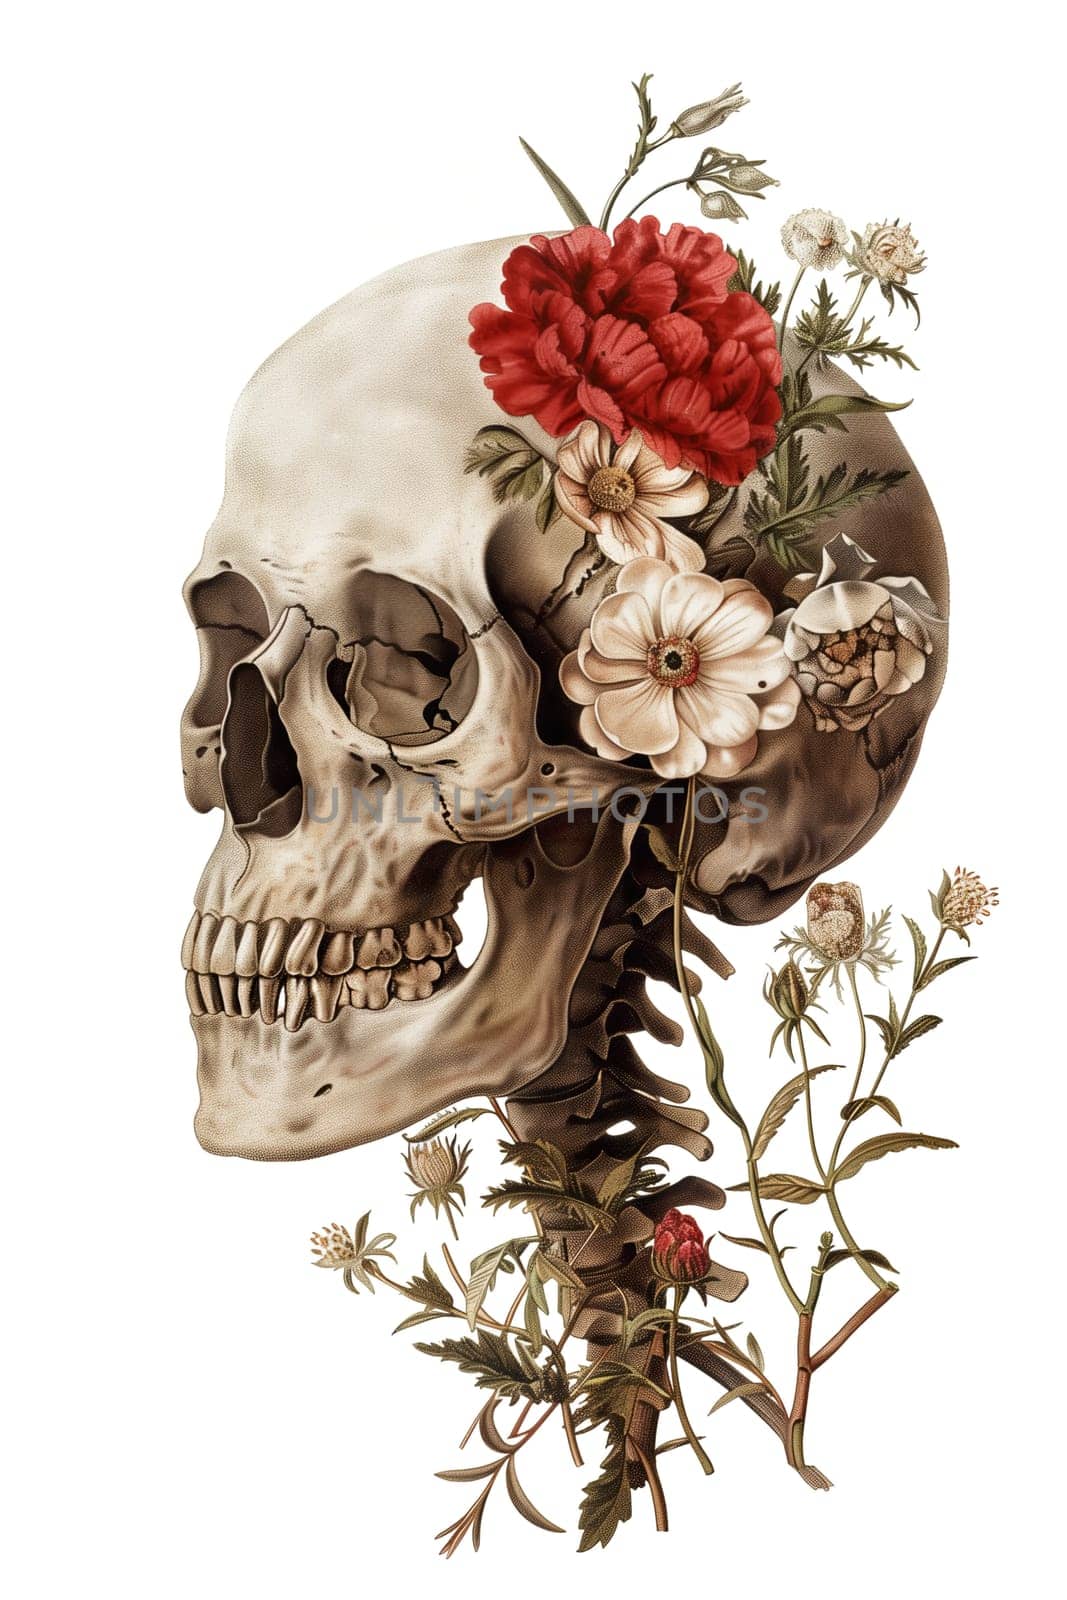 Vintage cut out Illustration of skull with flowers by Dustick